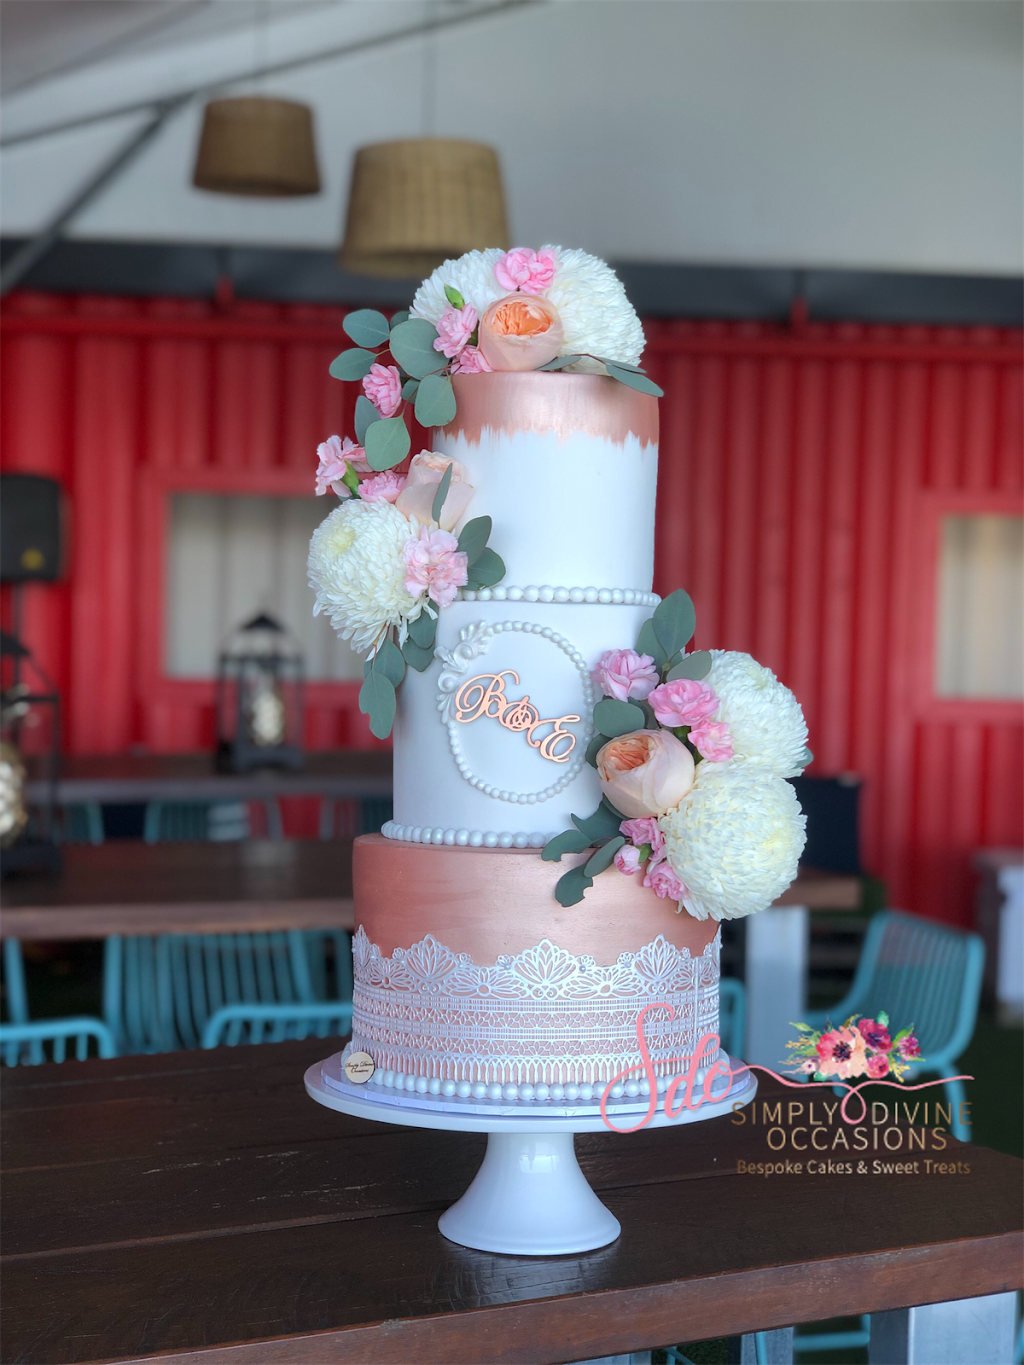 Simply Divine Occasions | bakery | Diosma St, Bellbowrie QLD 4070, Australia